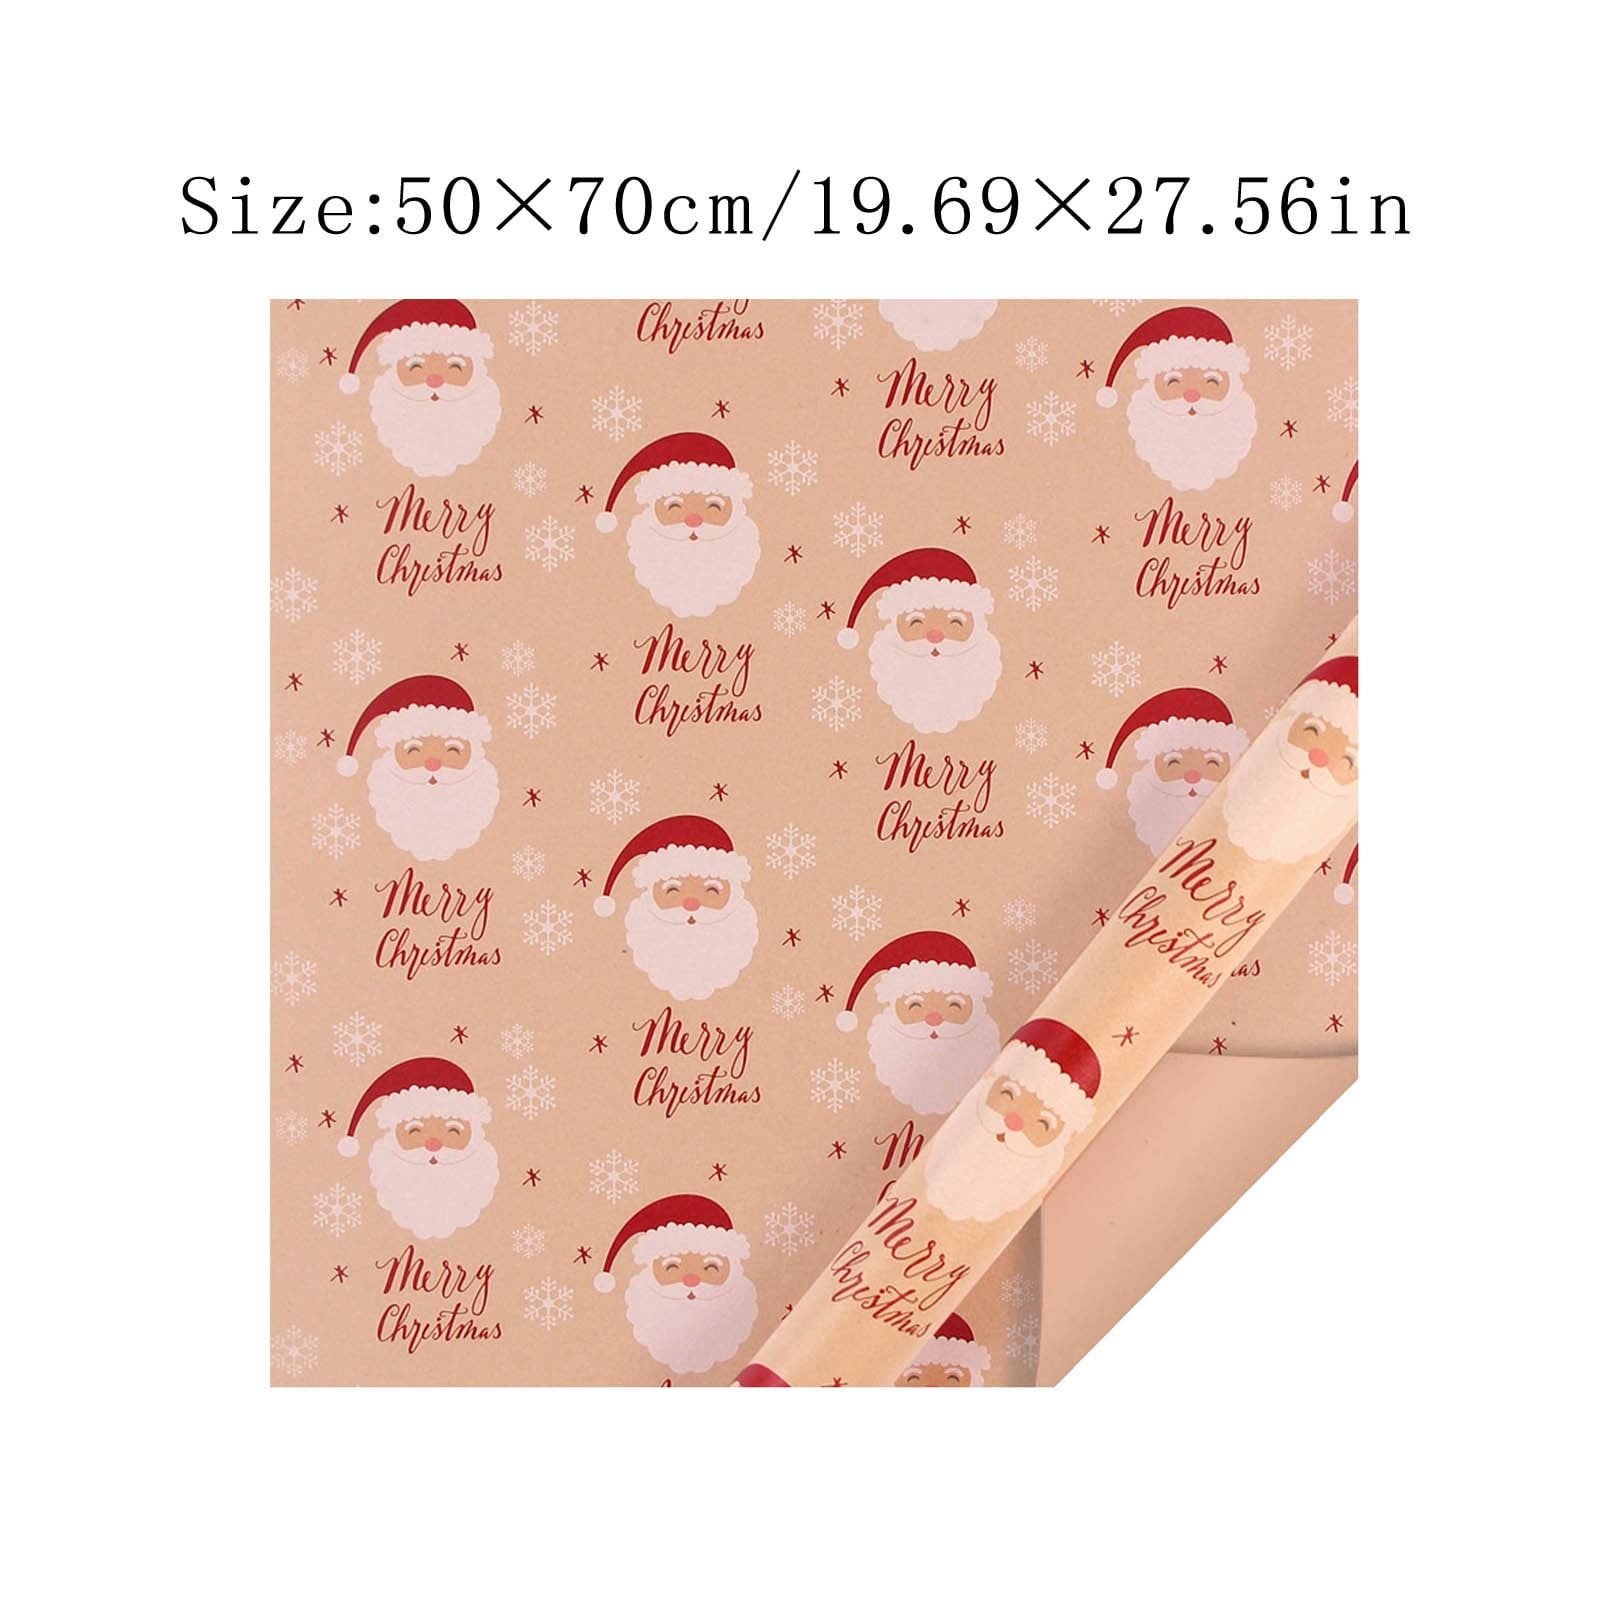 Pjtewawe Christmas Decorations Gift Wrapping Paper DIY Christmas